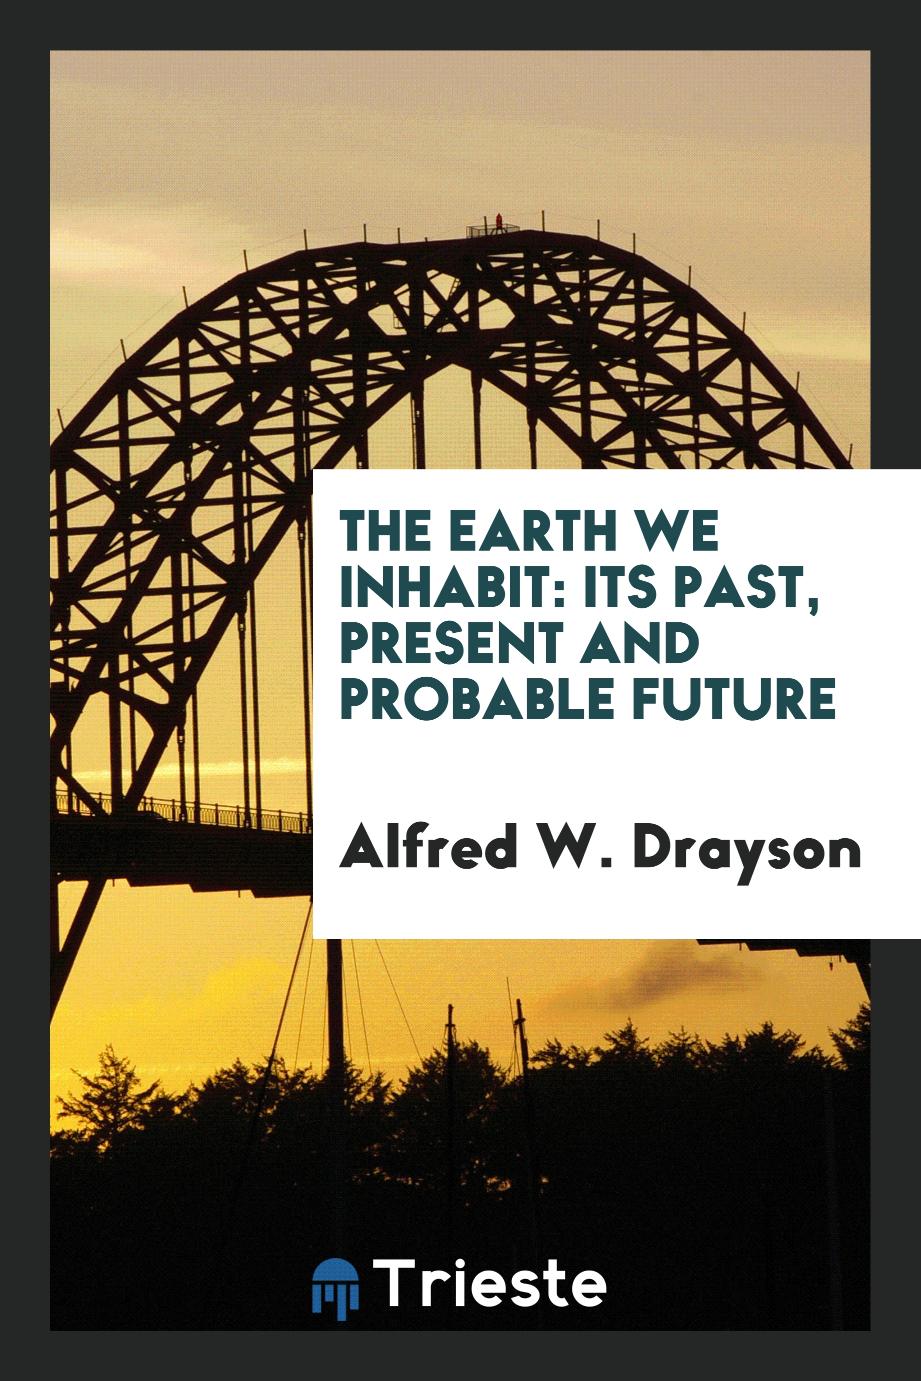 The Earth We Inhabit: Its Past, Present and Probable Future